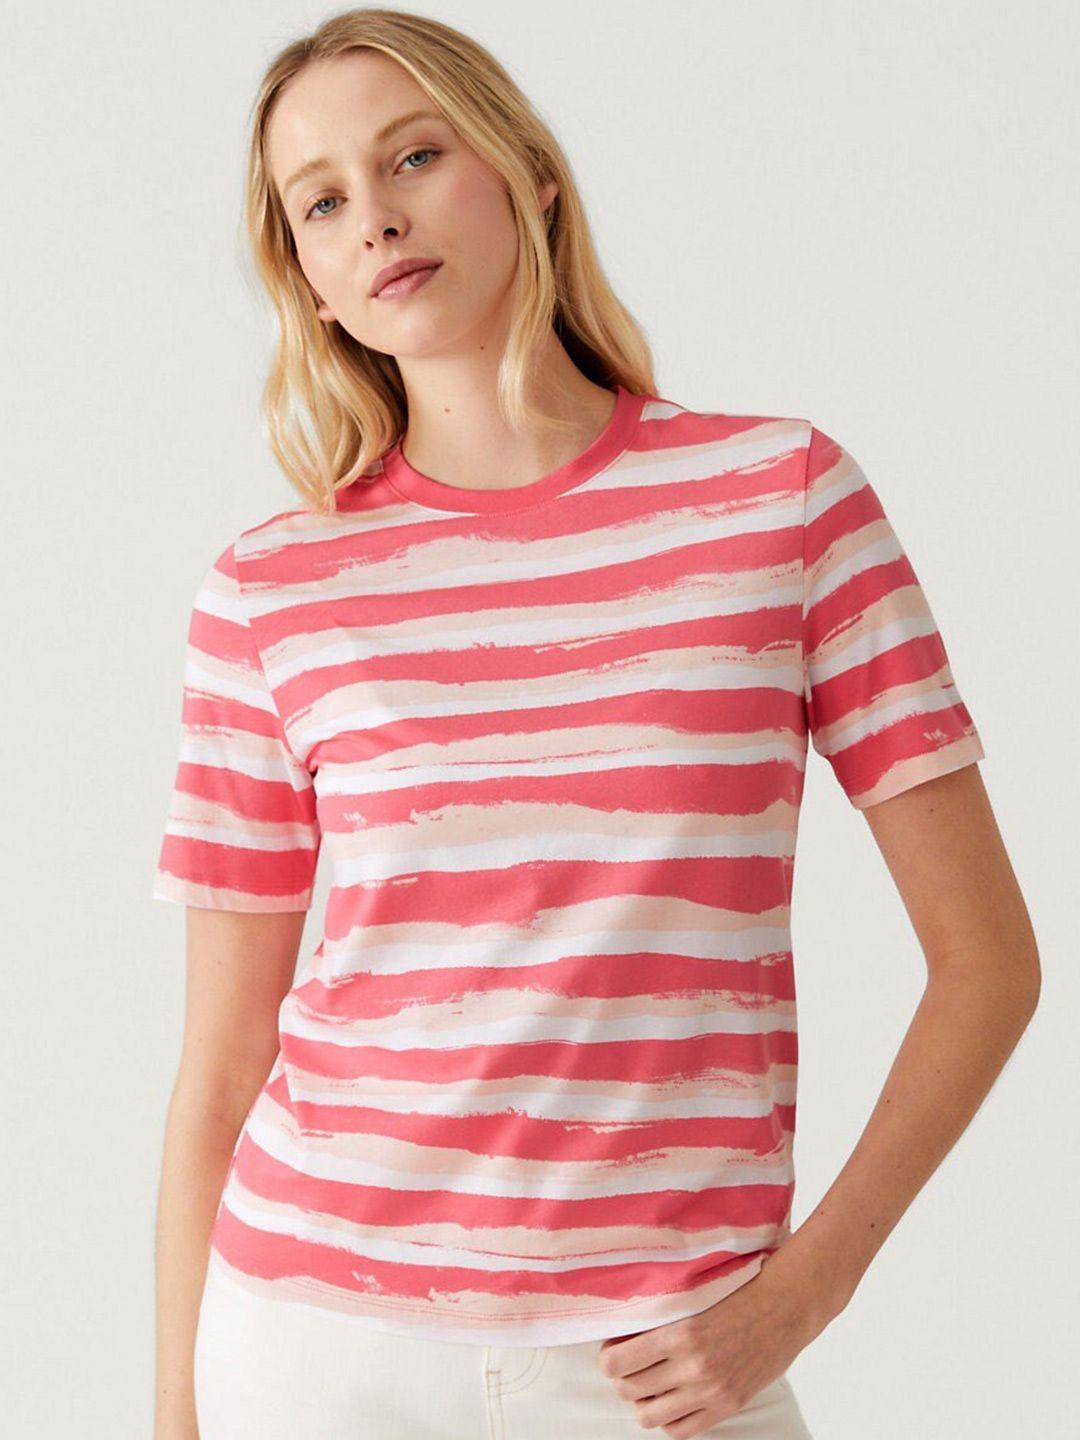 marks & spencer striped pure cotton t-shirt